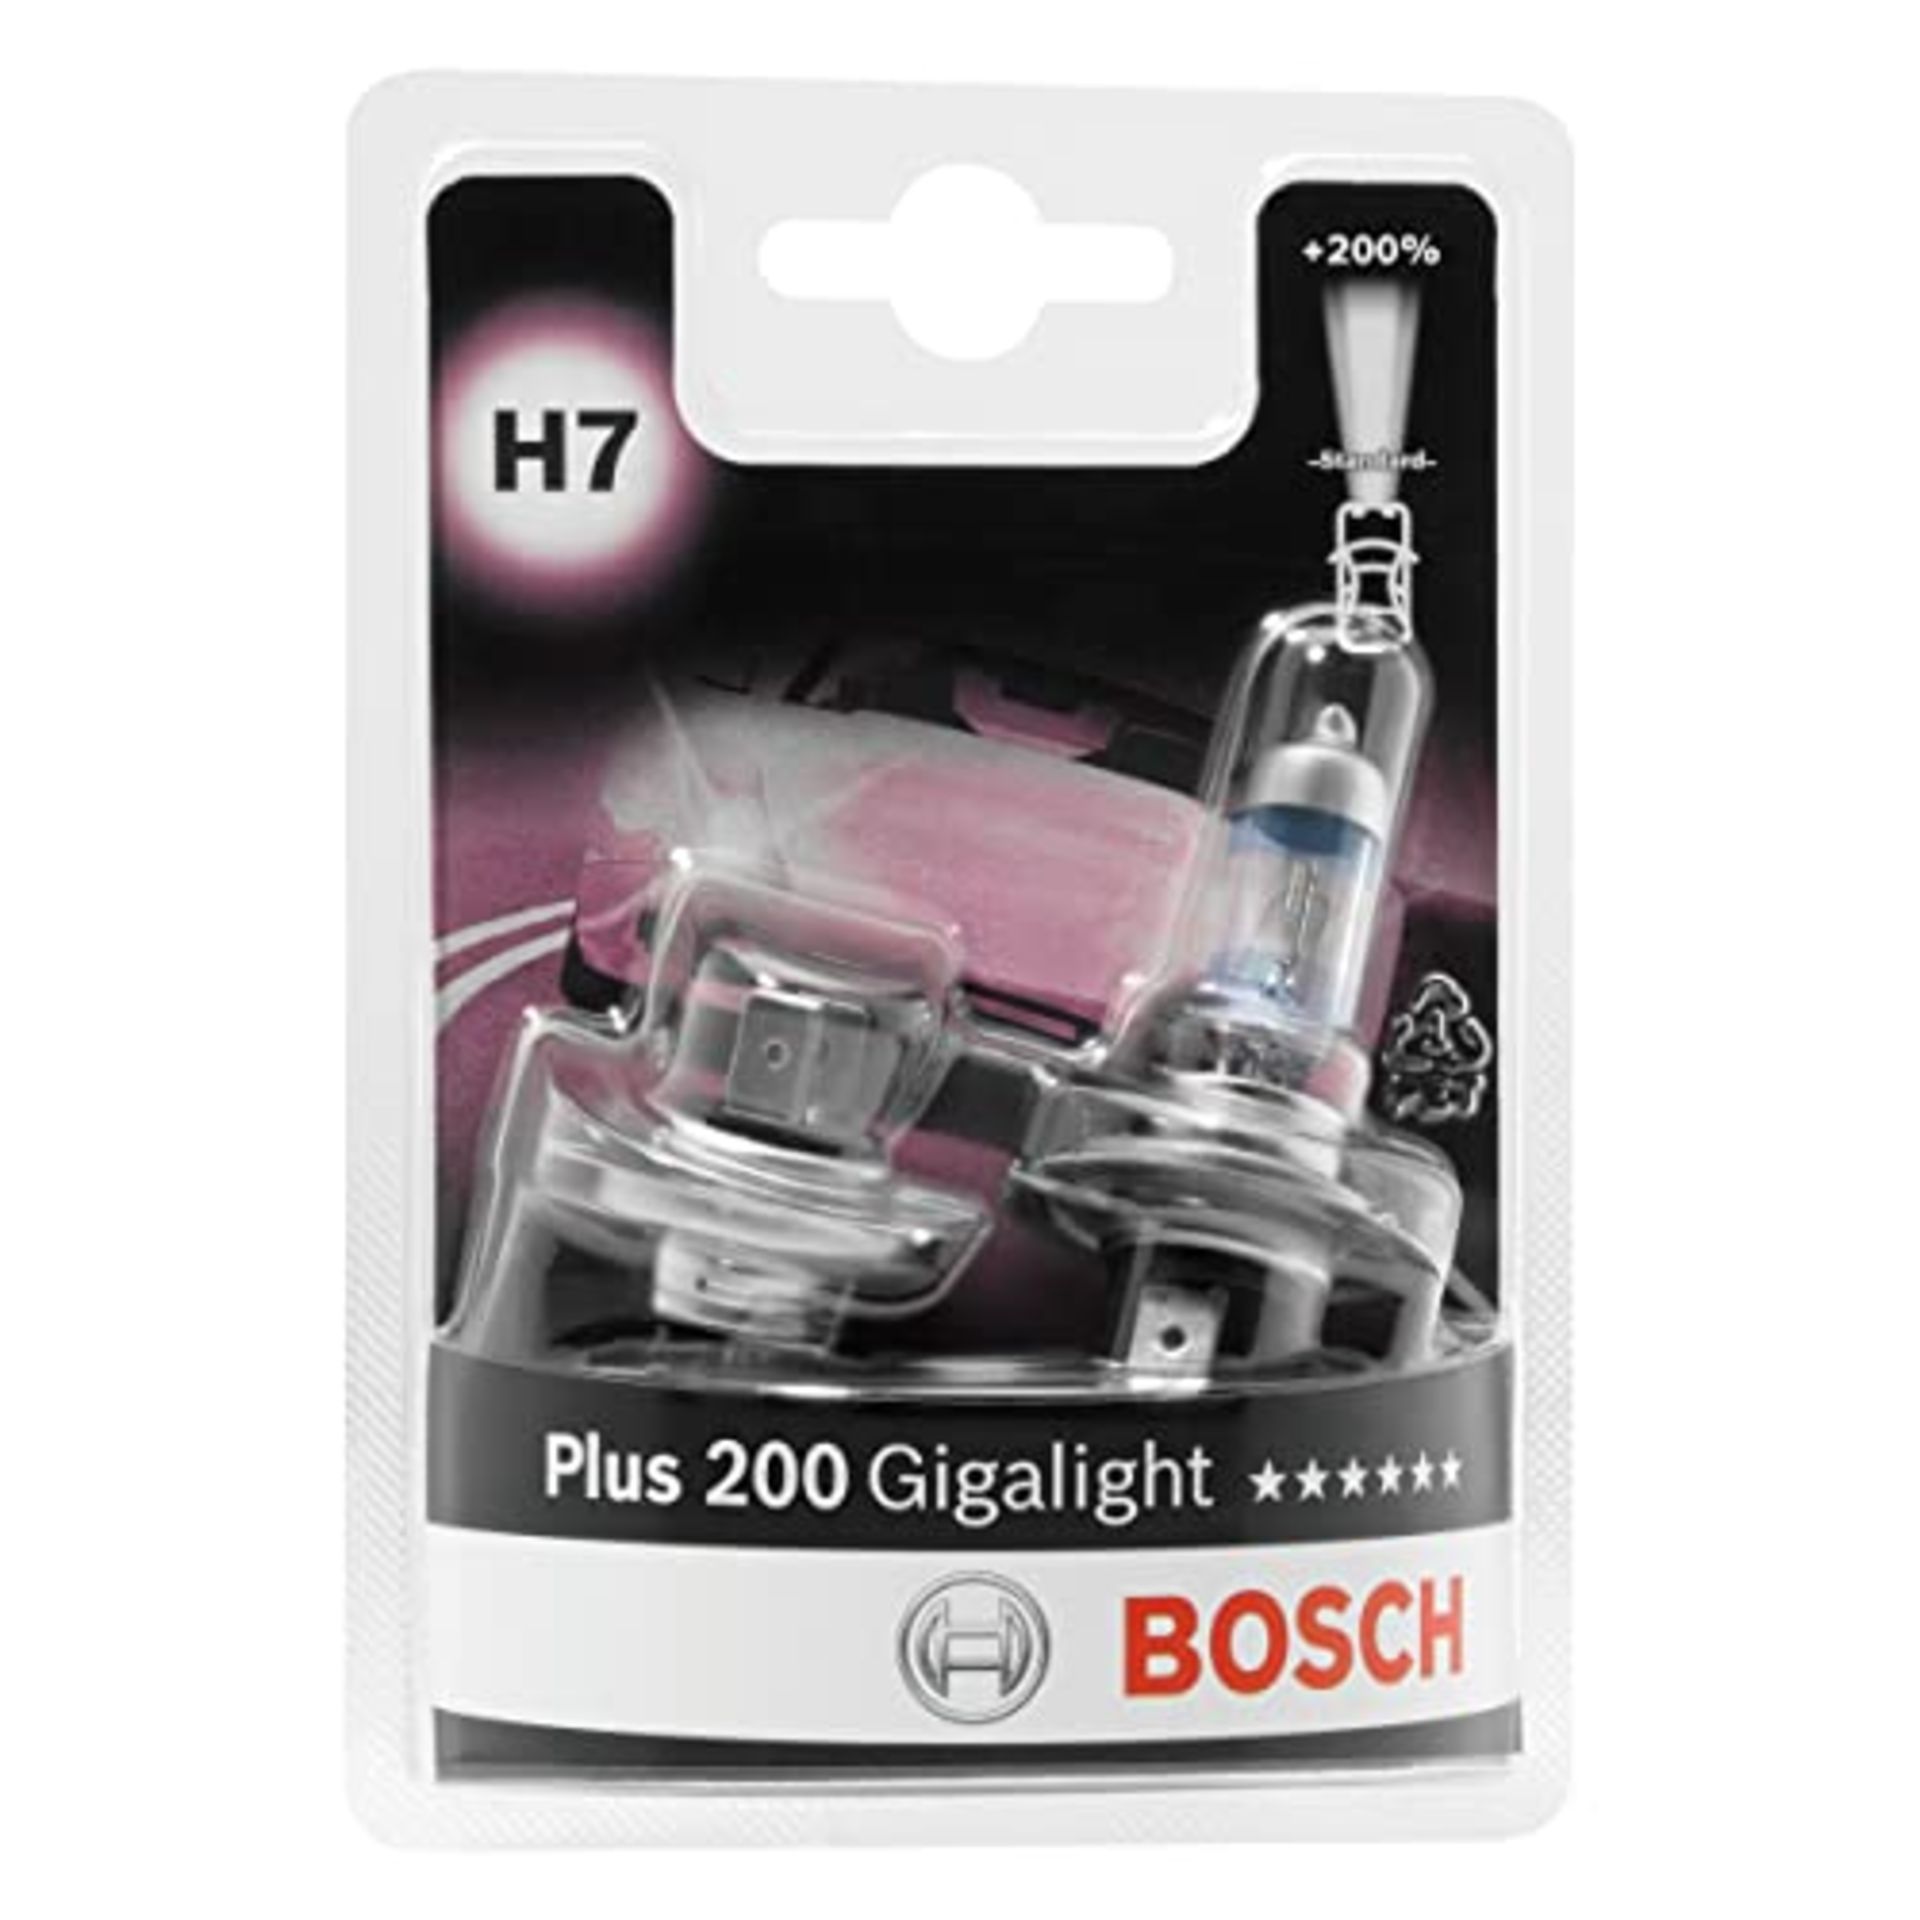 Bosch H7 Plus 200 Gigalight Lamps - 12 V 55 W PX26d - 2 Pieces - Image 4 of 6